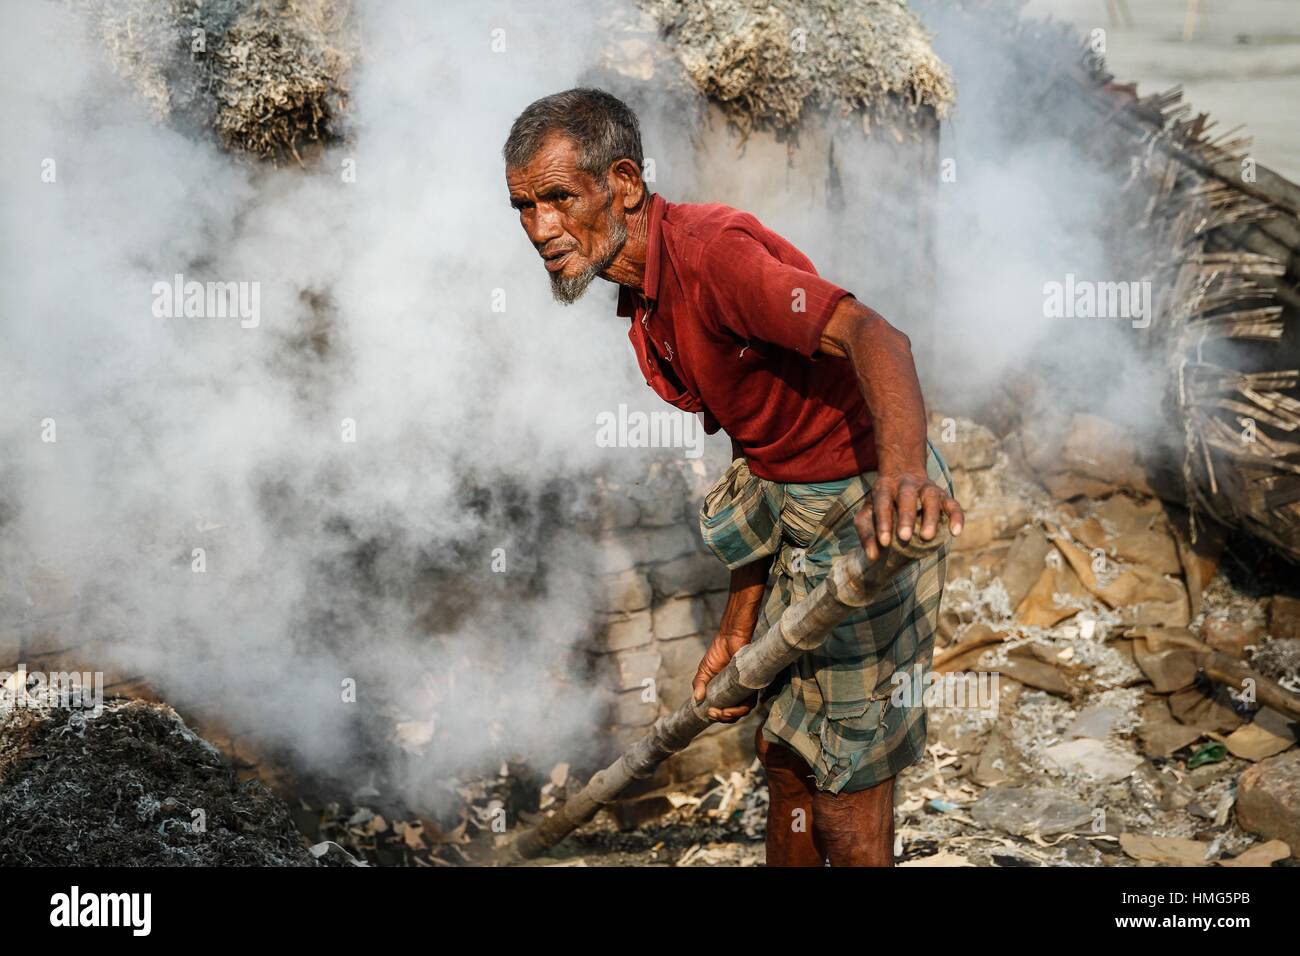 A man processes tannery wastes to make poultry feed at Hazaribagh along the polluted Buriganga river in Dhaka. Stock Photo